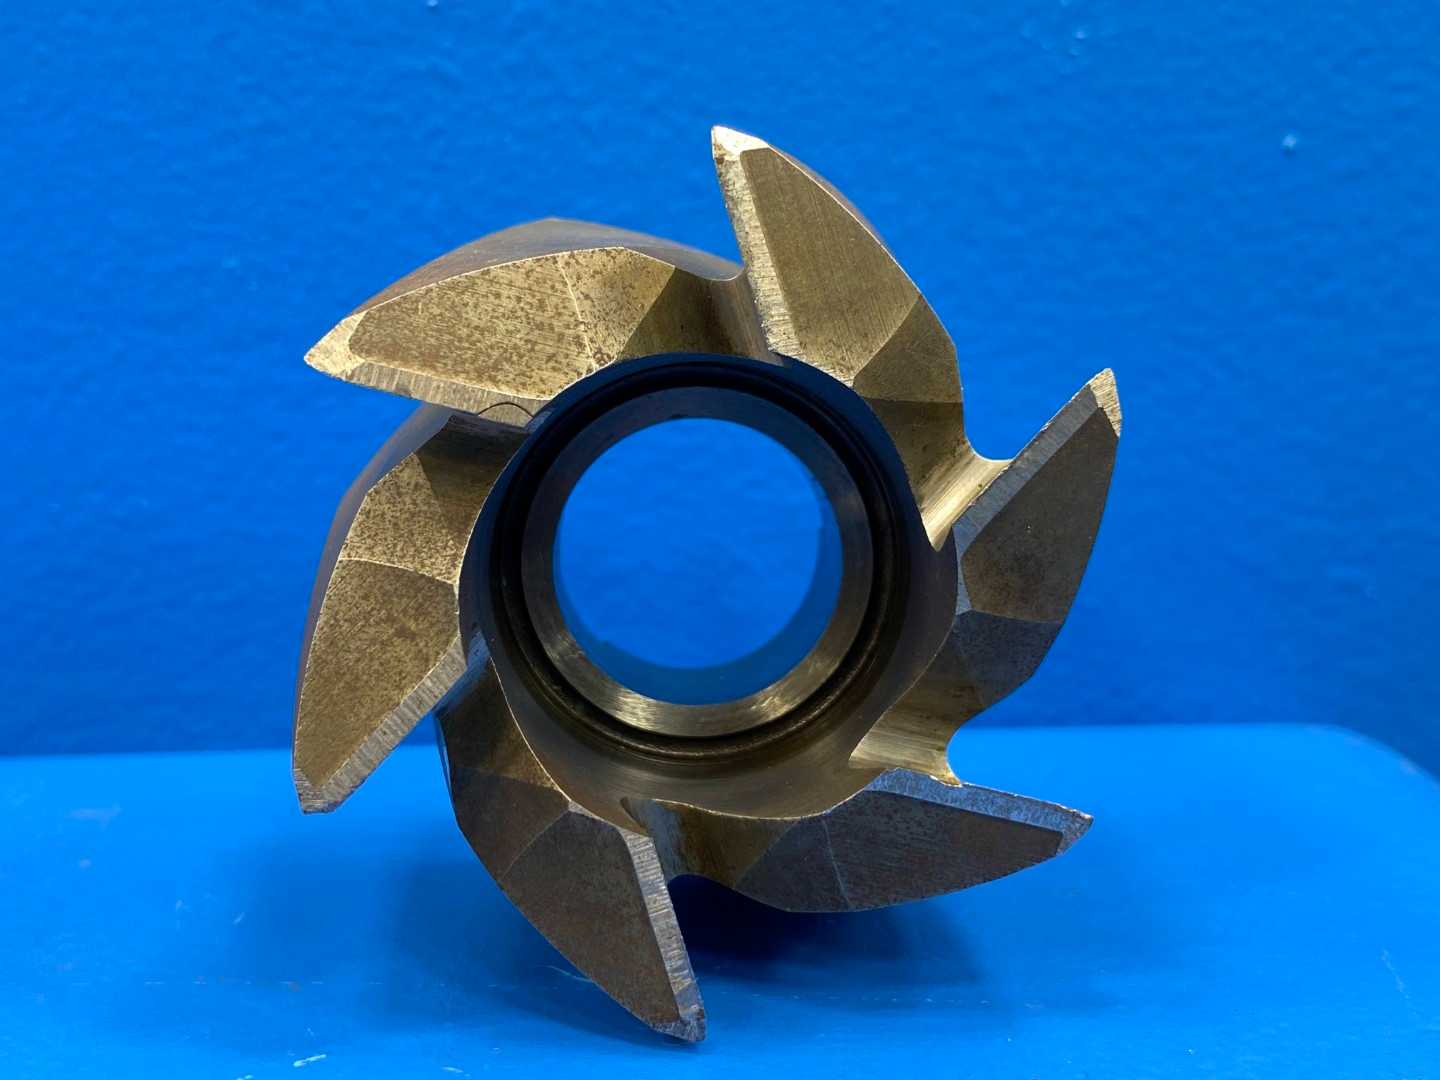 HSG UNION Milling Cutter 2 3-4R FOR DURAL